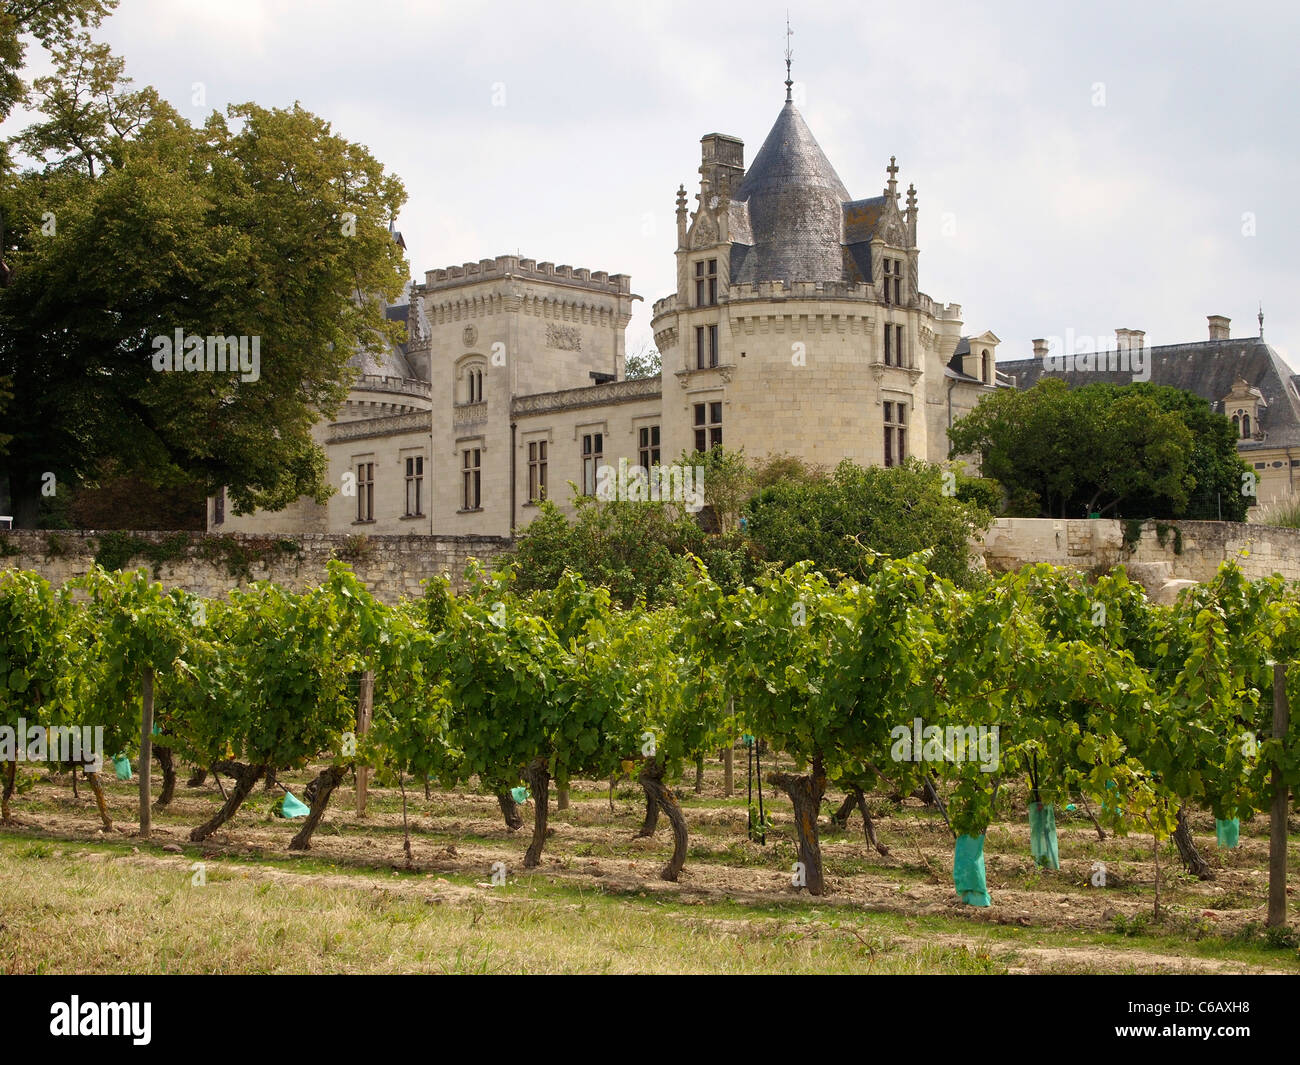 Chateau de Brézé with it's vineyards, producing great wines since the 16th century. Loire valley, France Stock Photo